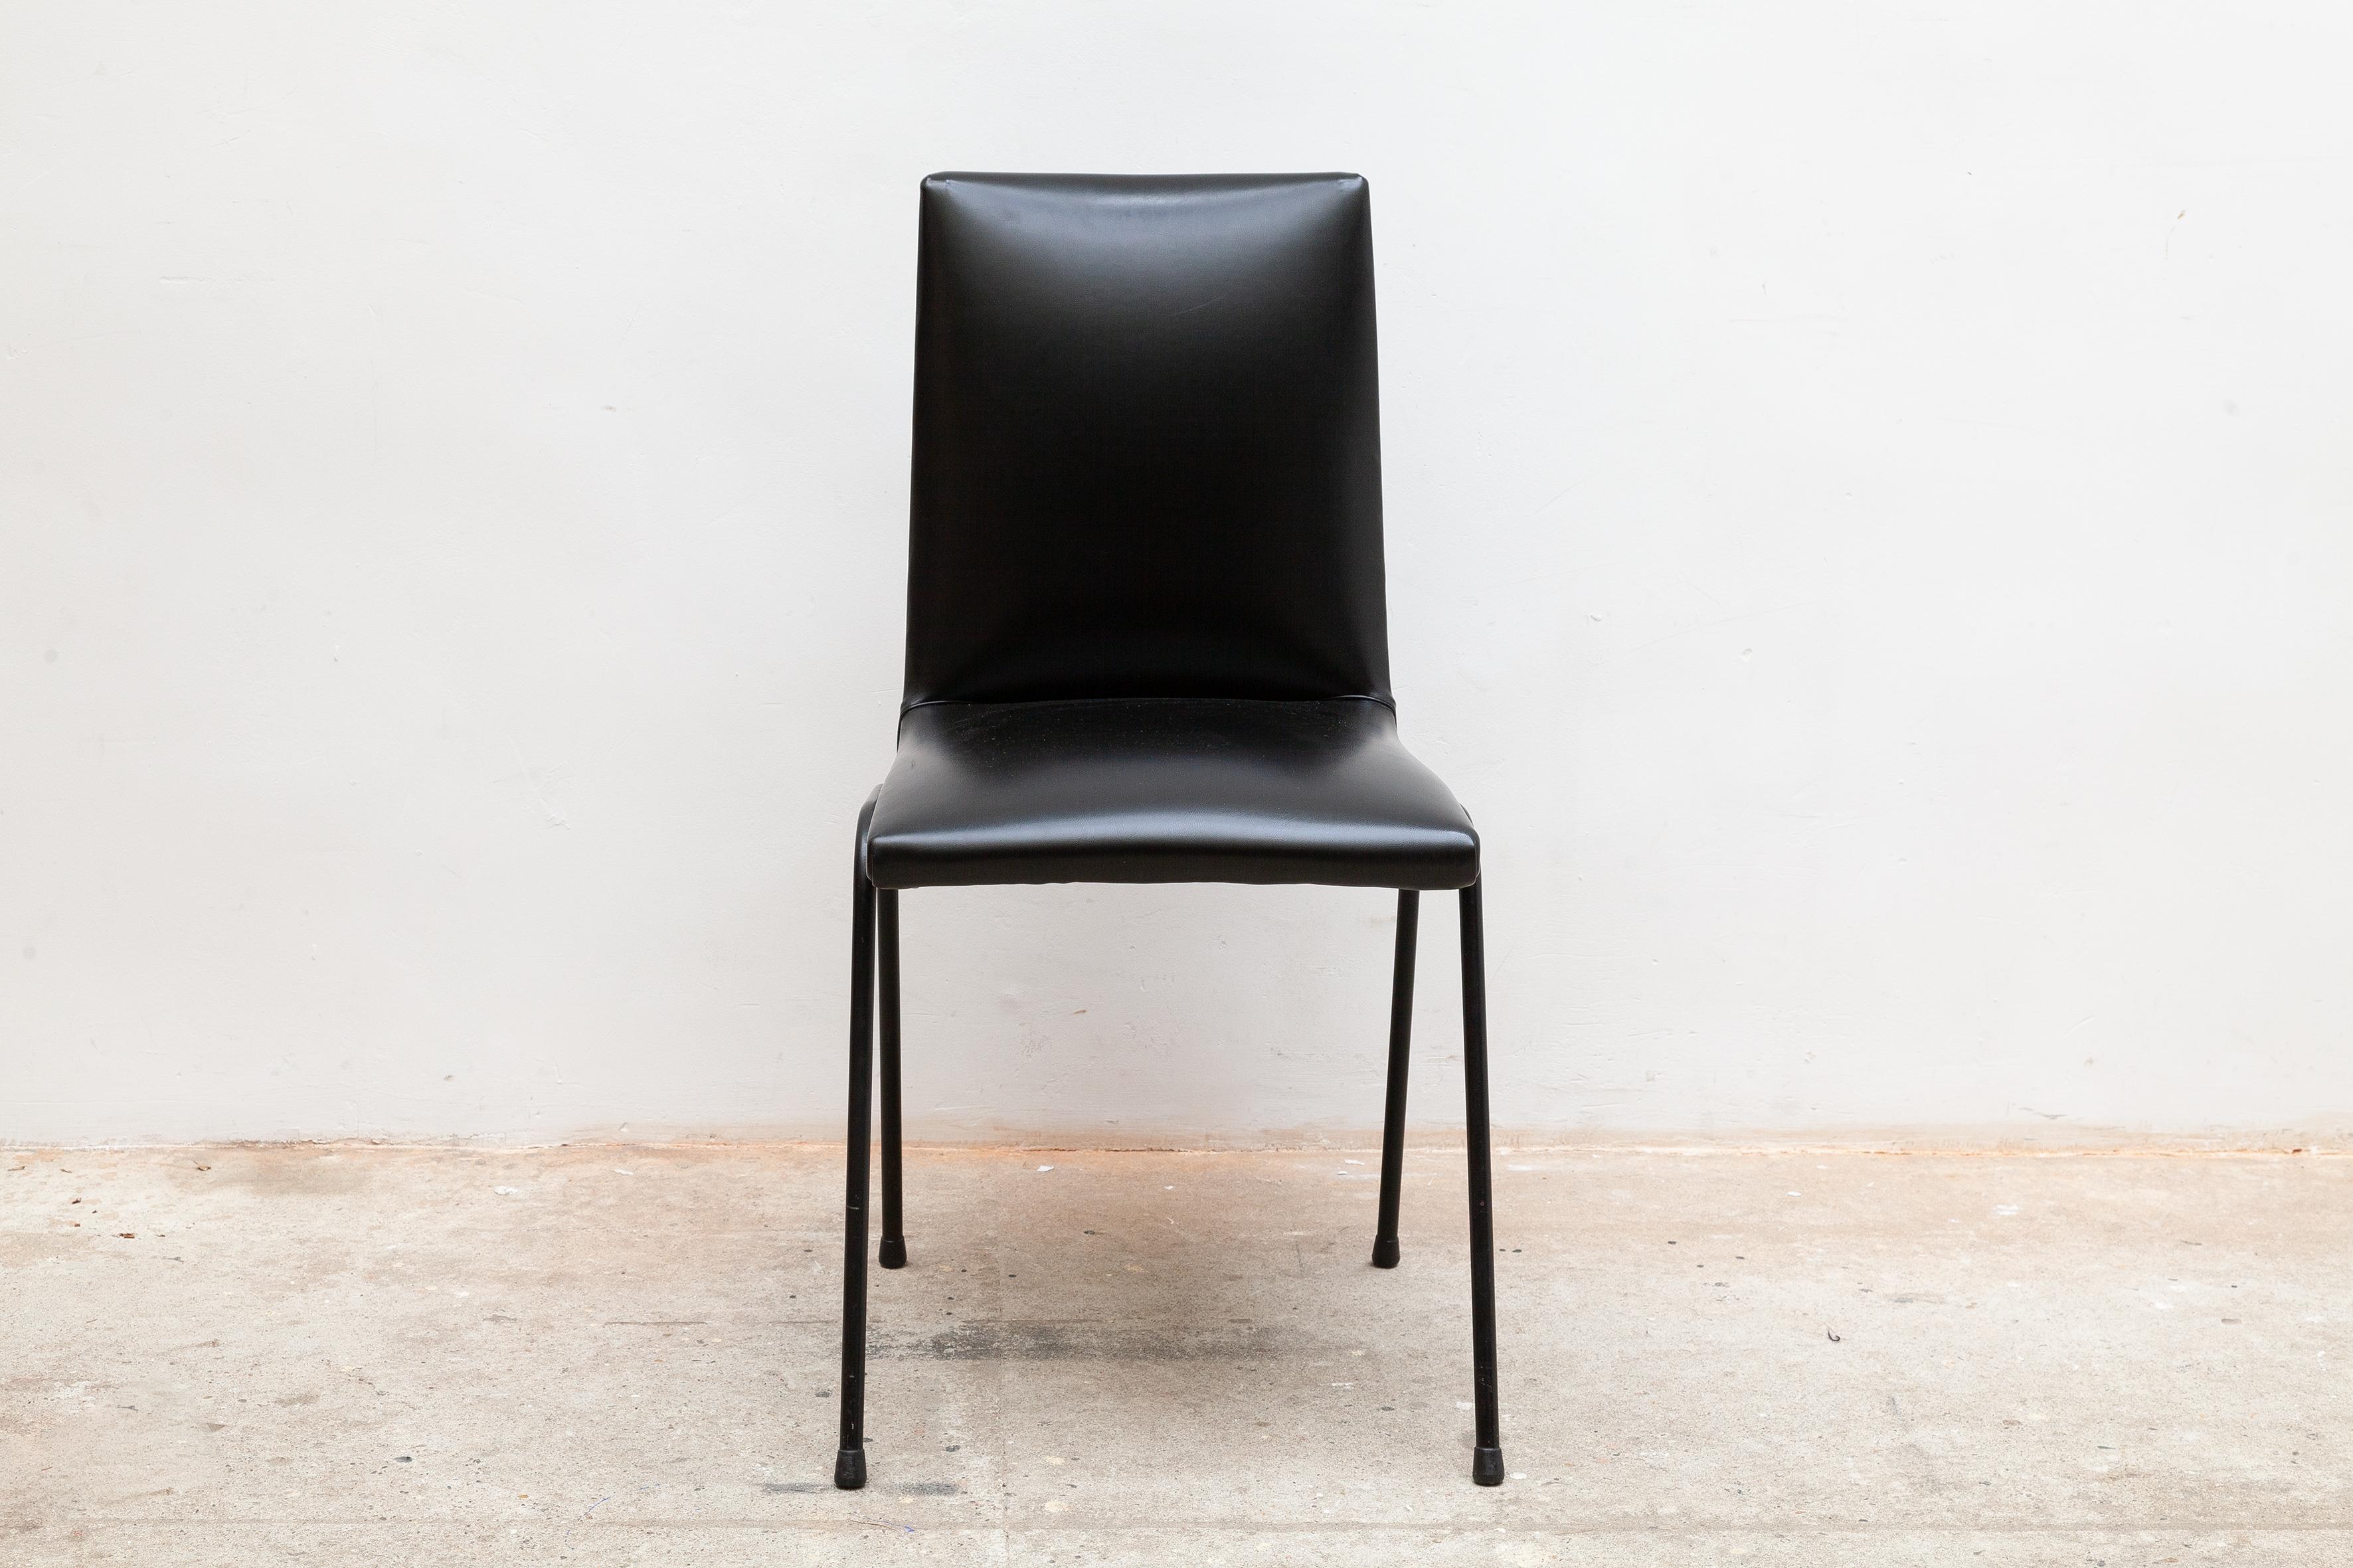 Vintage mid-century chair by Pierre Guariche for Meurop, Belgium. Enameled black tubular steel frame with original black vinyl upholstery in excellent condition.
Dimensions: 40W x 85H x 45D cm Seat: 45 cm high.
 